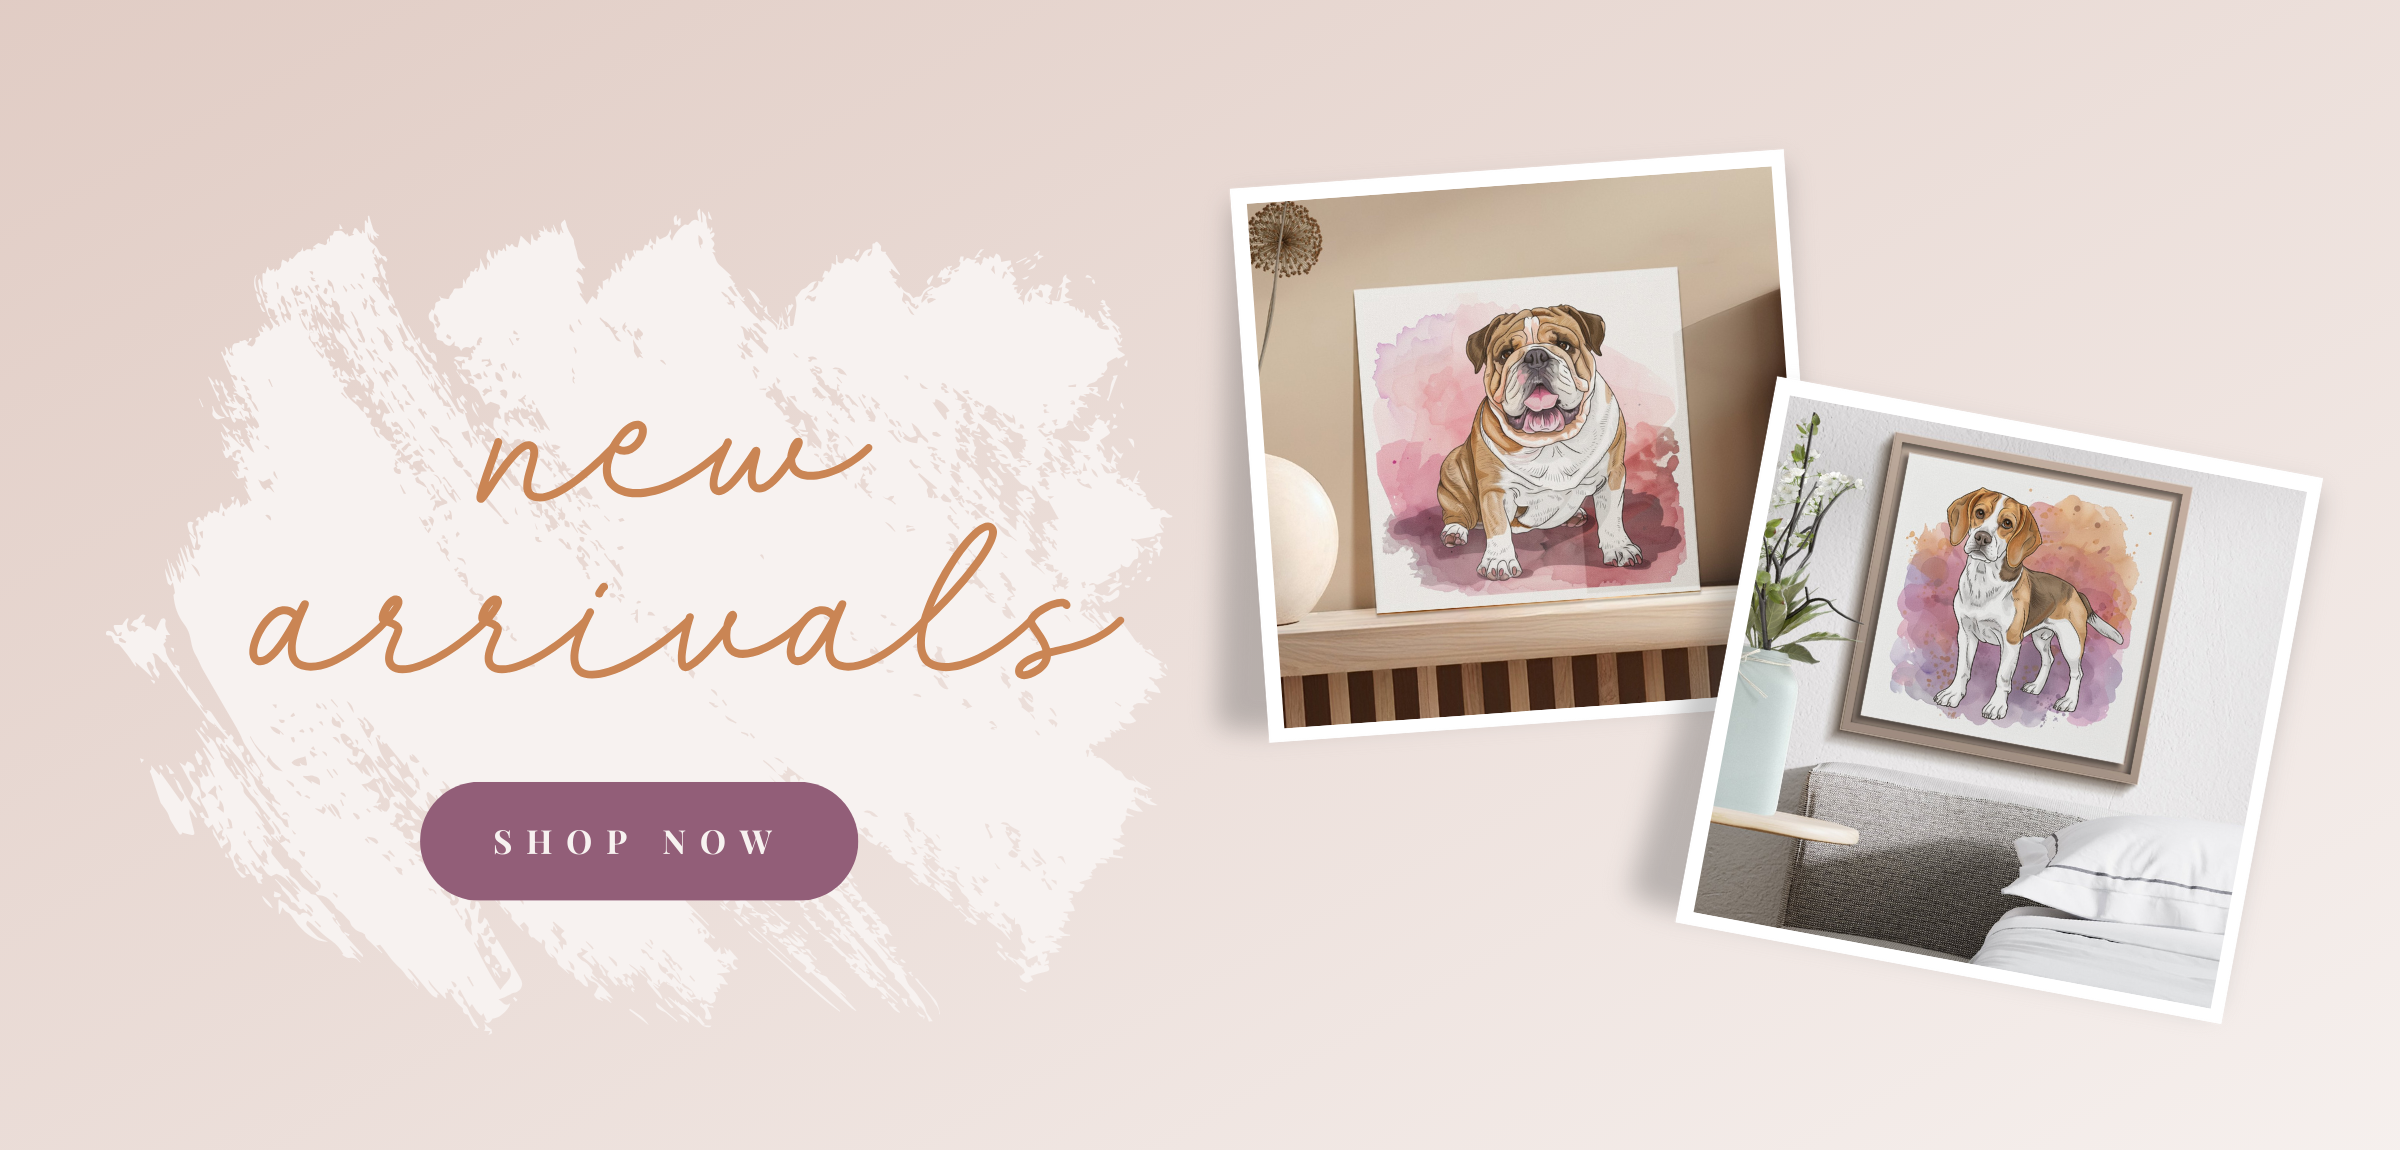 We specialize in creating vibrant watercolors that capture the essence of joy and whimsy. From enchanting pet portraits, to colorful apparel, to lively home decor, we offer a diverse range of products to suit every taste.